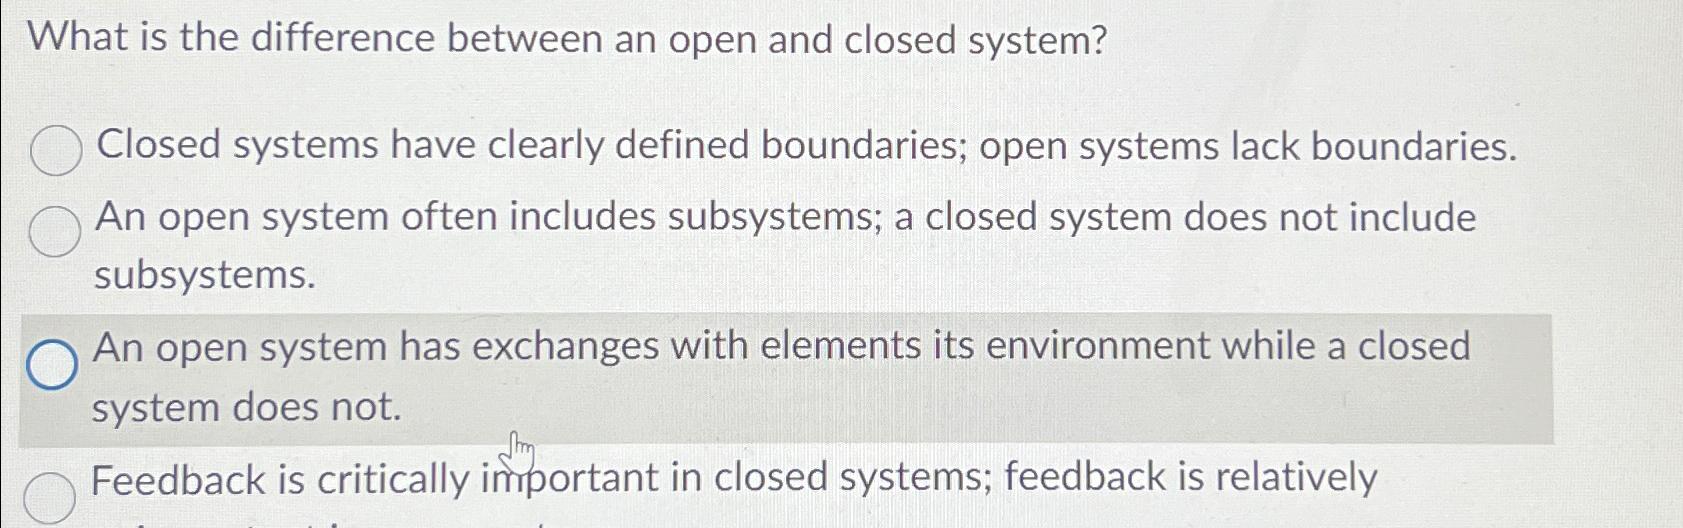 Open System vs. Closed System – What's the difference?